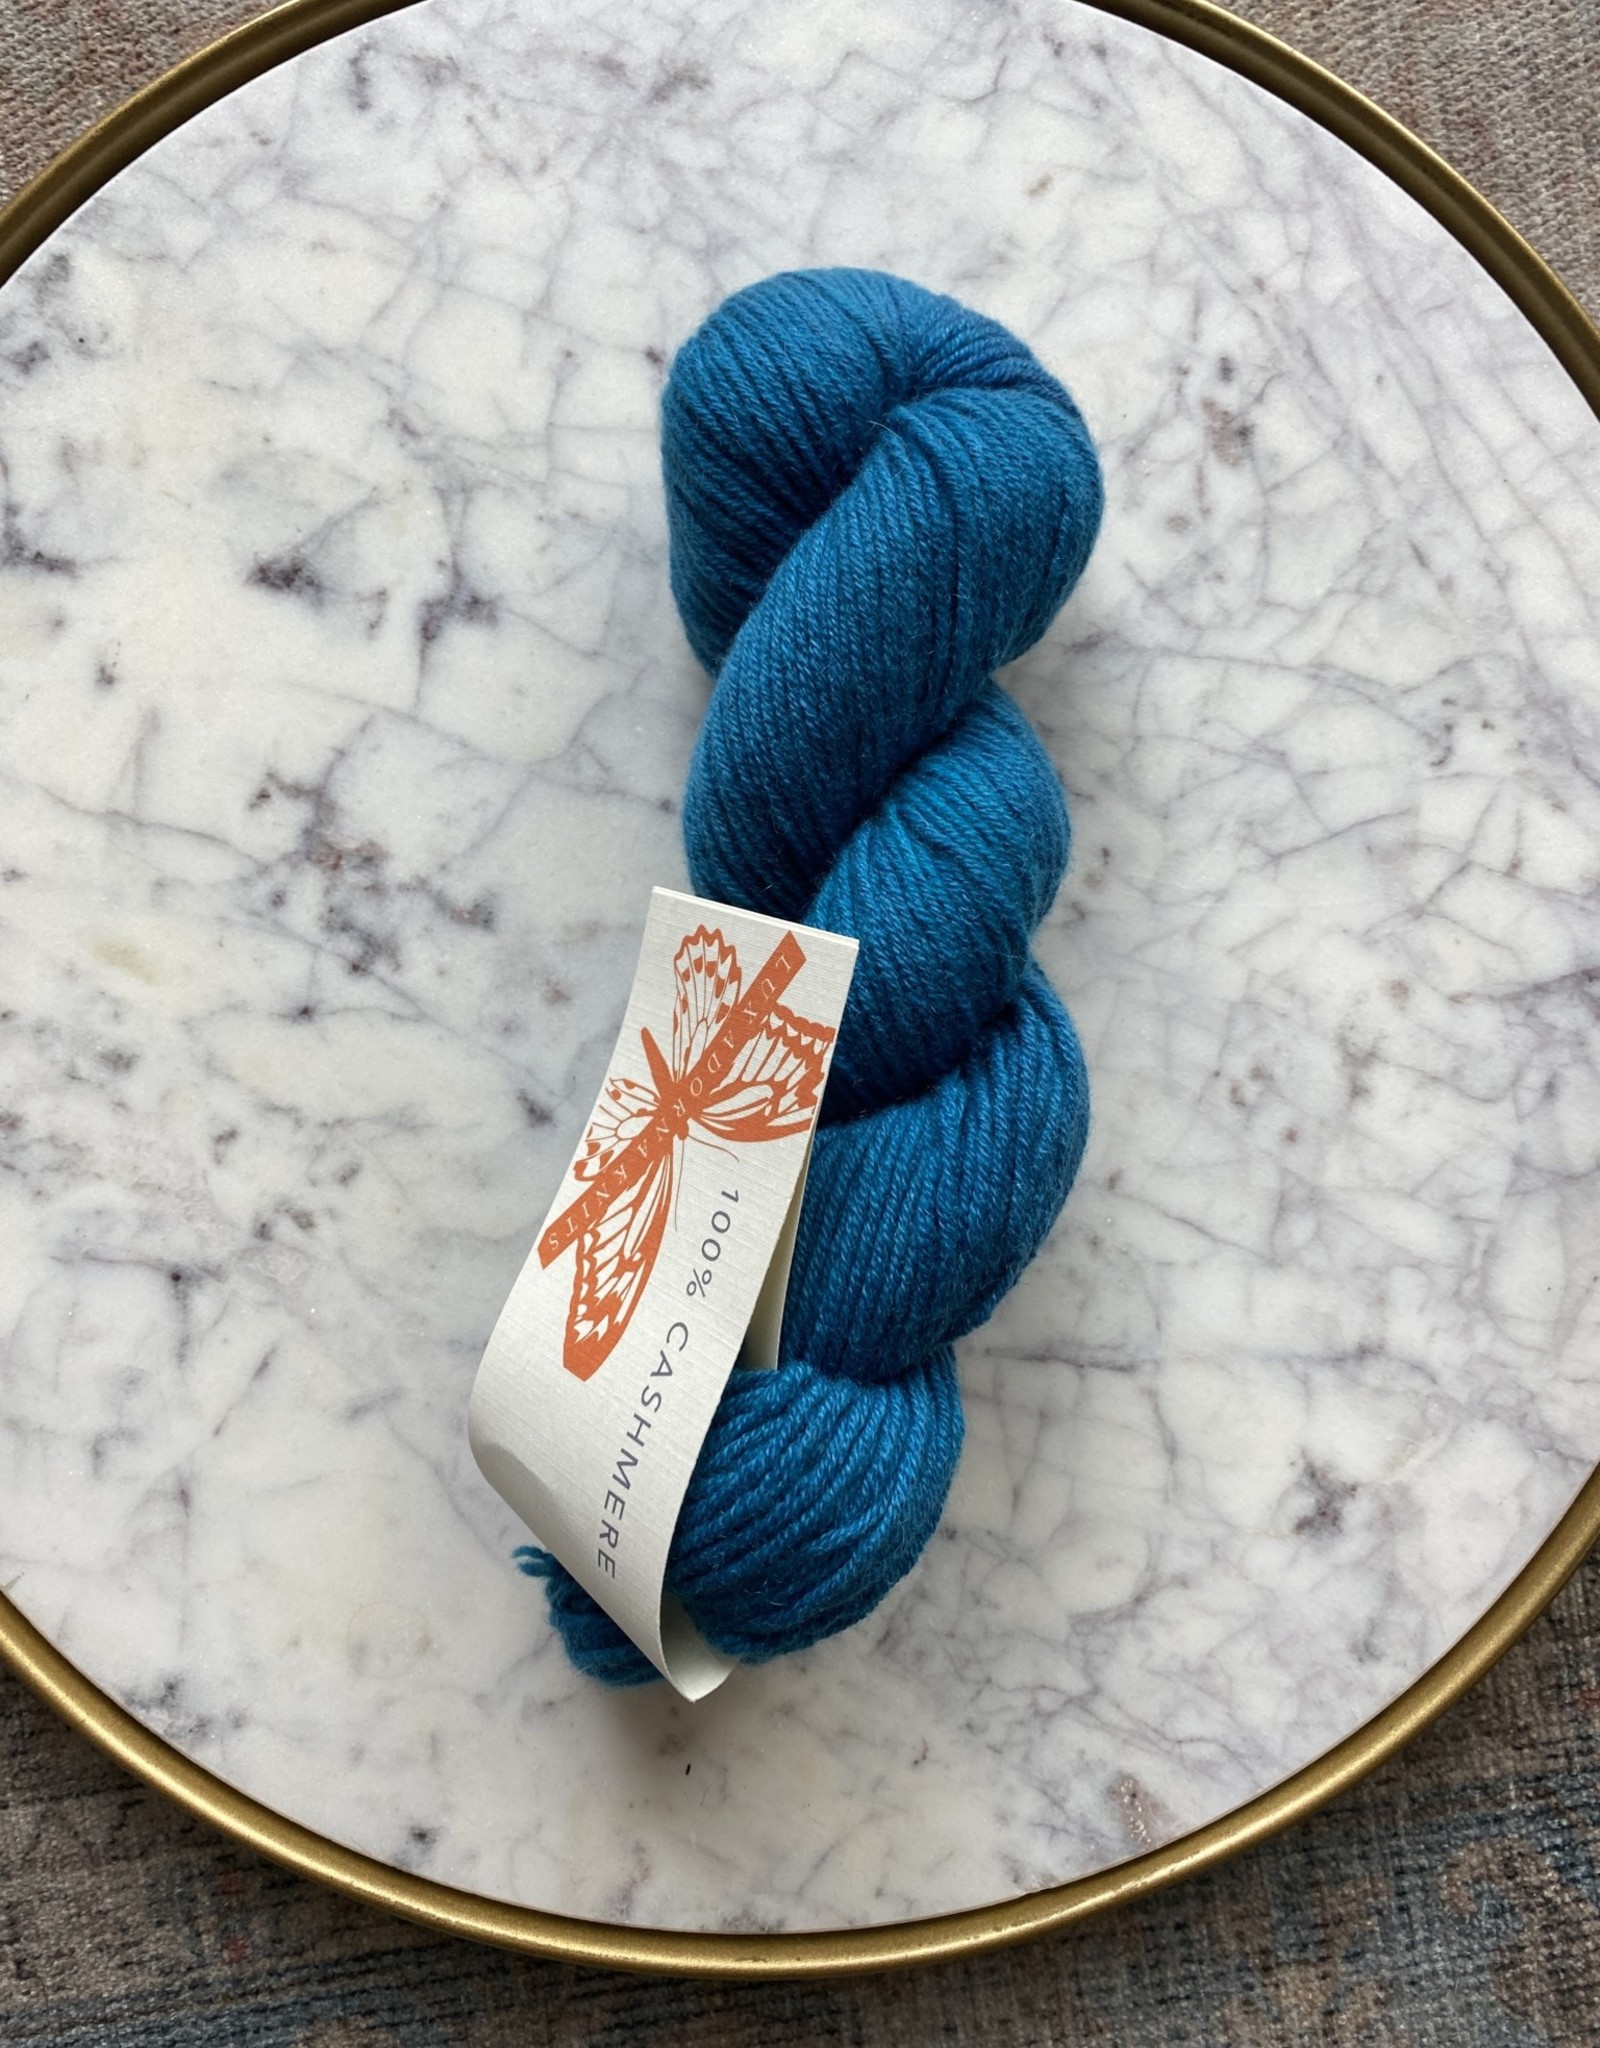 Lux Adorna Cashmere DK-Turquoise